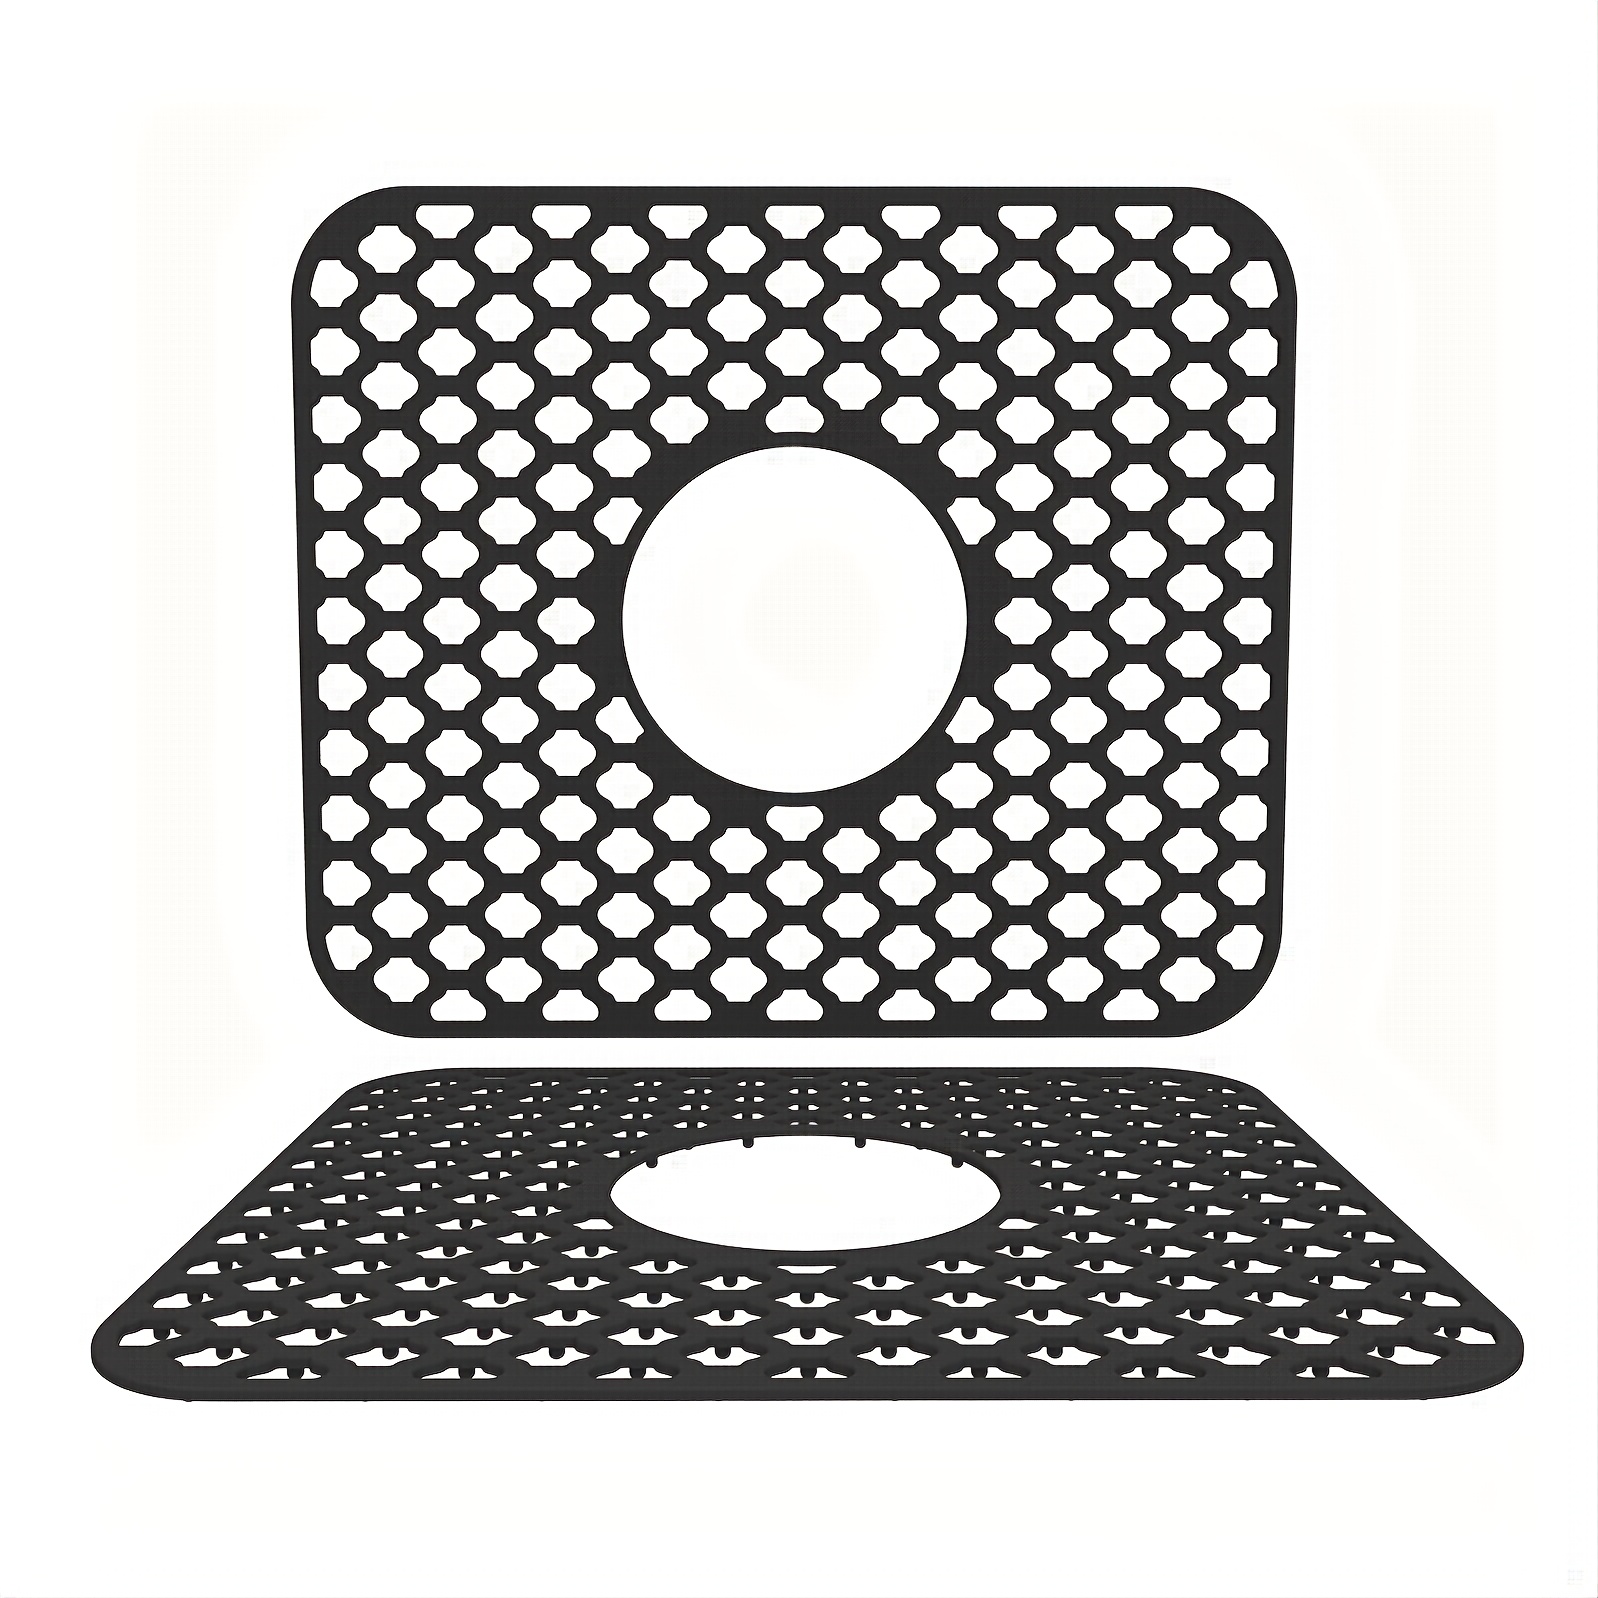 Fridja Silicone Sink Mat Rear Kitchen Sink Protector Accessory Folding Non-Slip Sink Mats for Bottom of Stainless Steel Porcelain Sink Clearance, Size